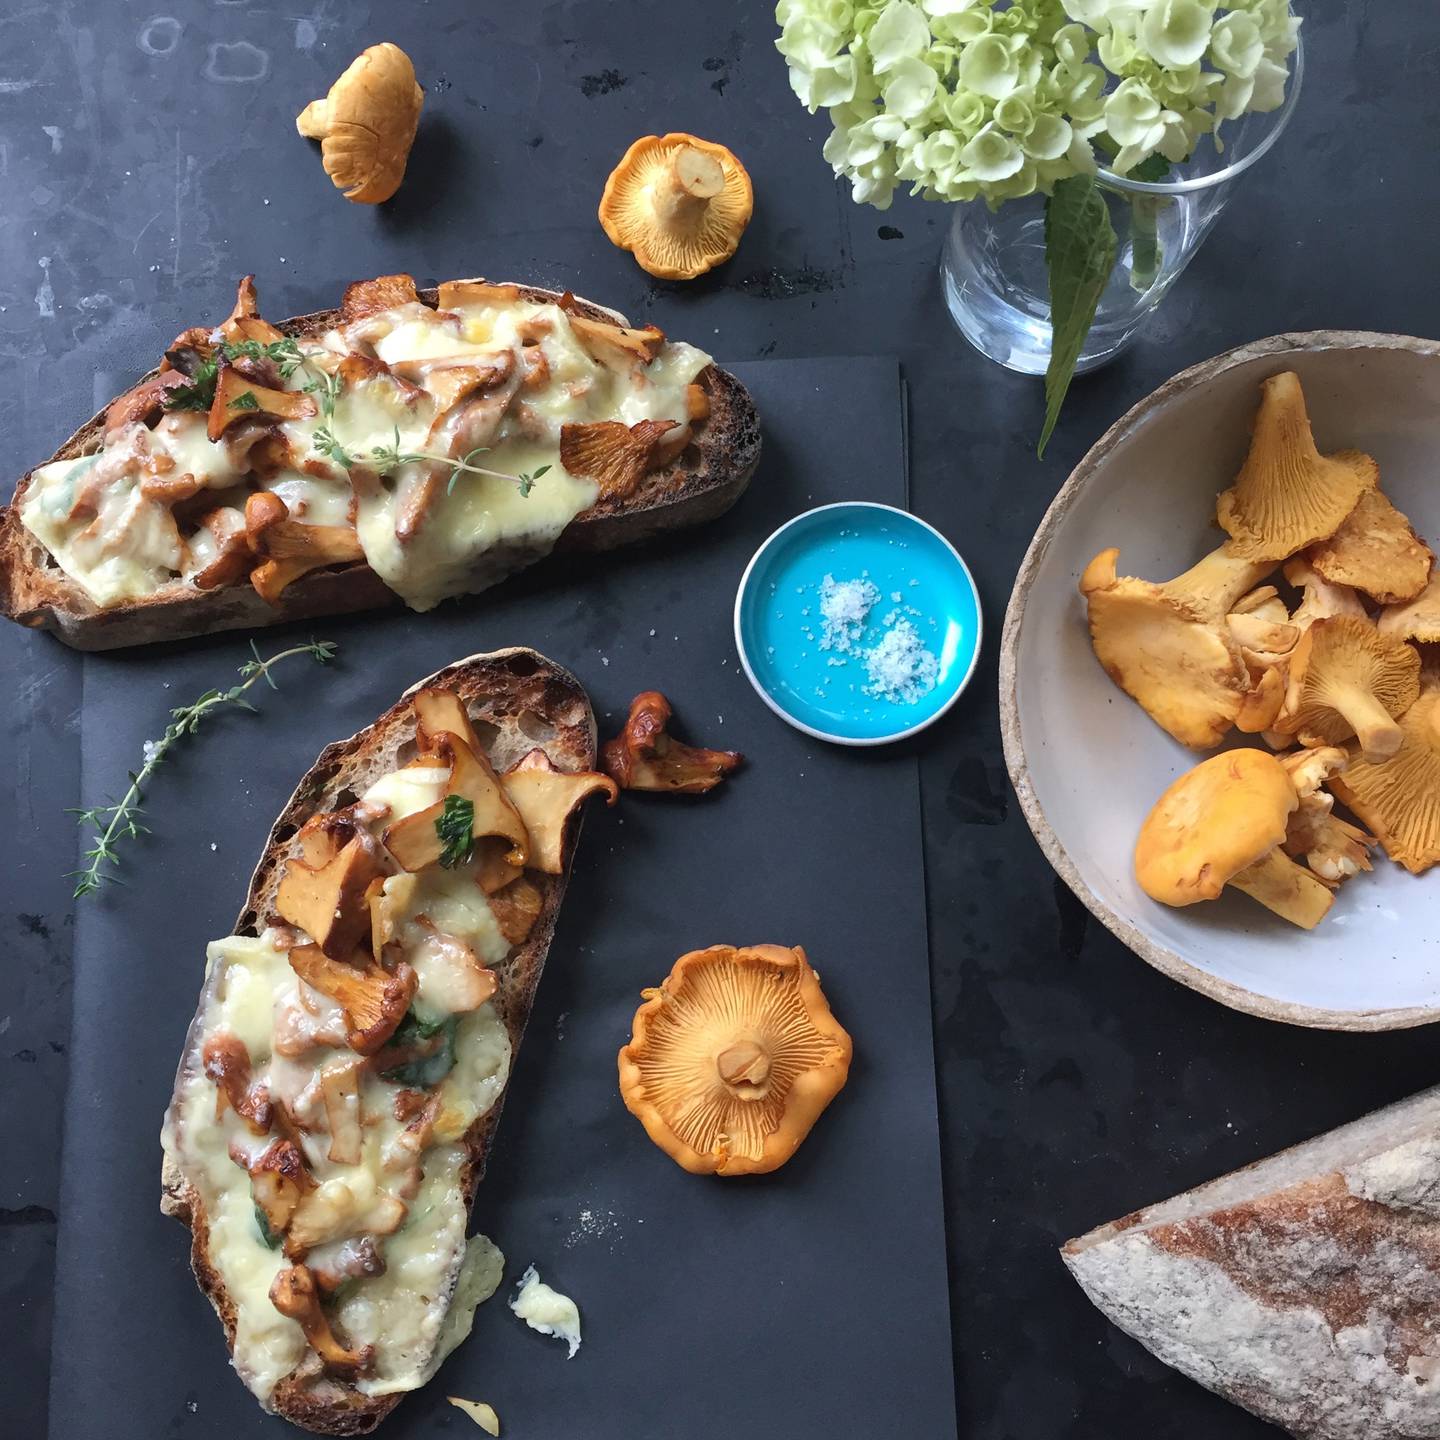 Warm and toasty, wild mushroom and cheese open-face sandwiches make a ...